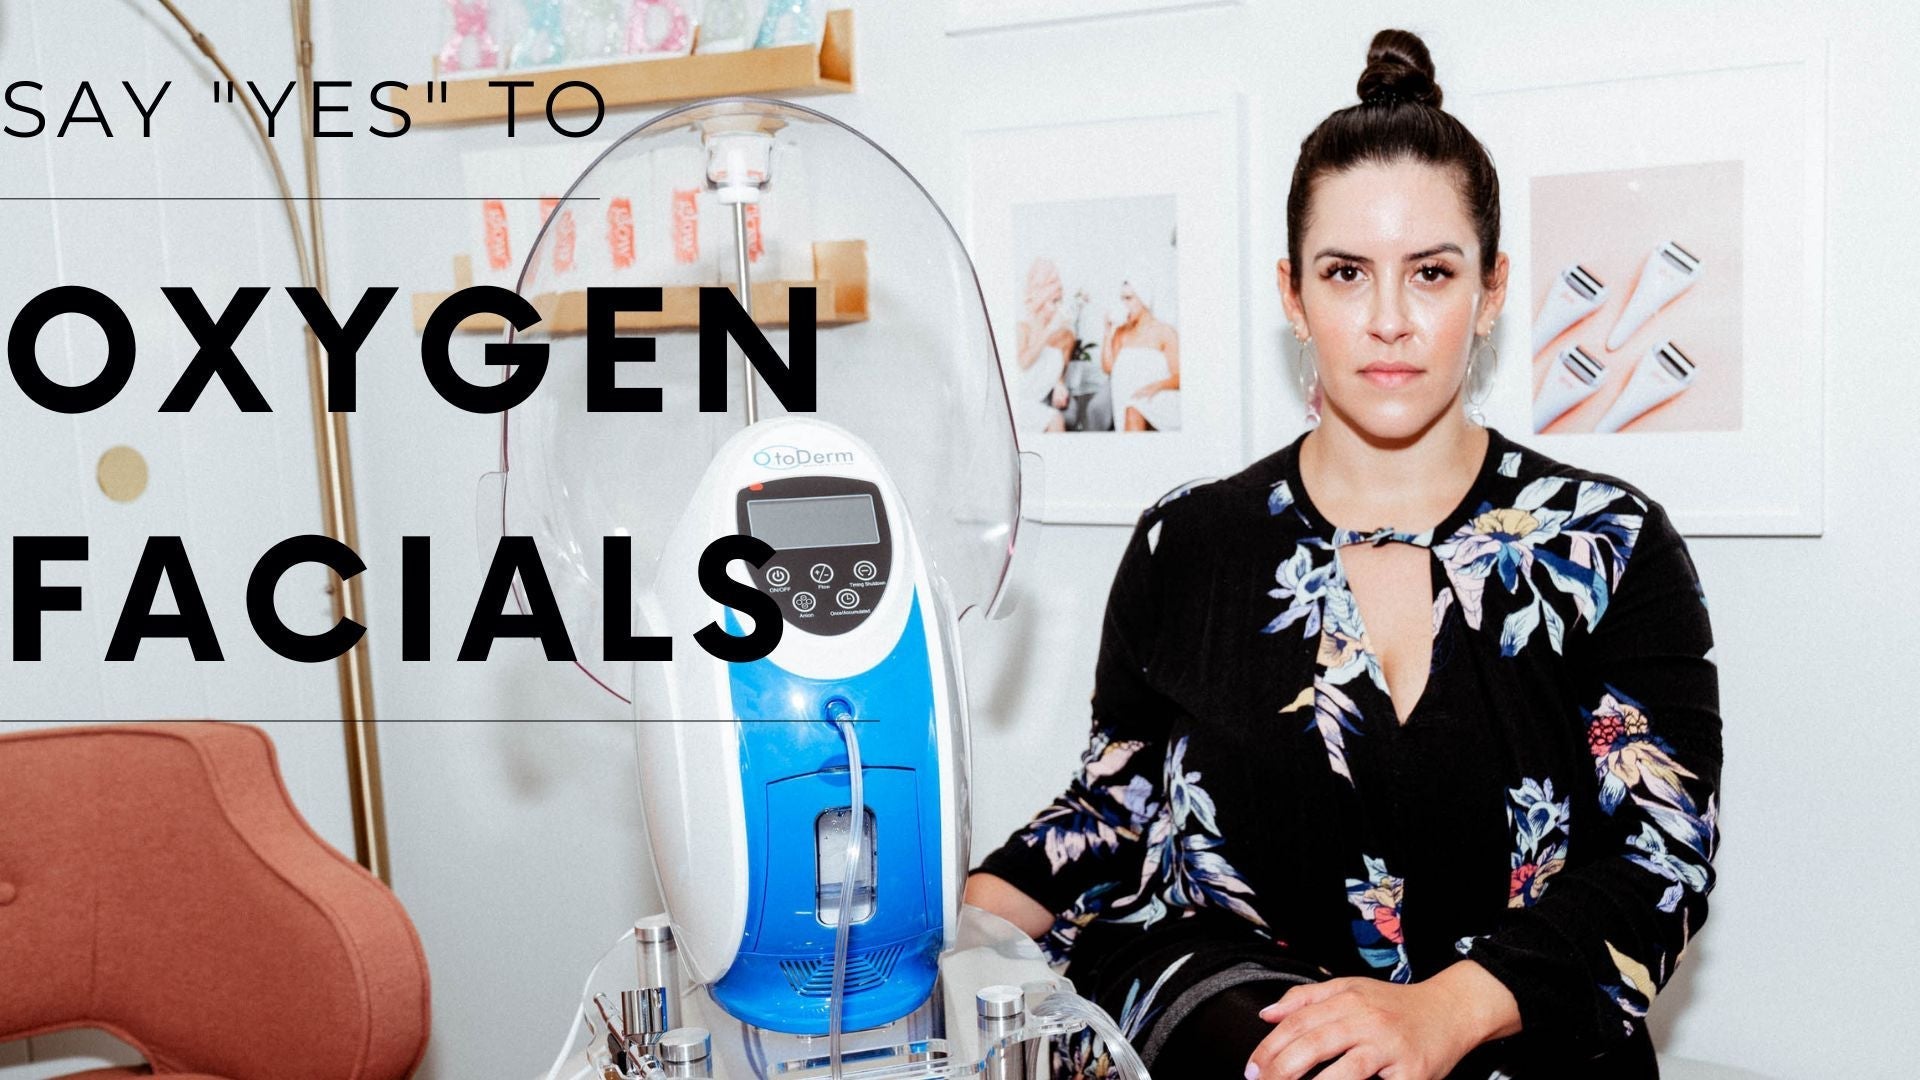 Say "Yes" to Oxygen Facials